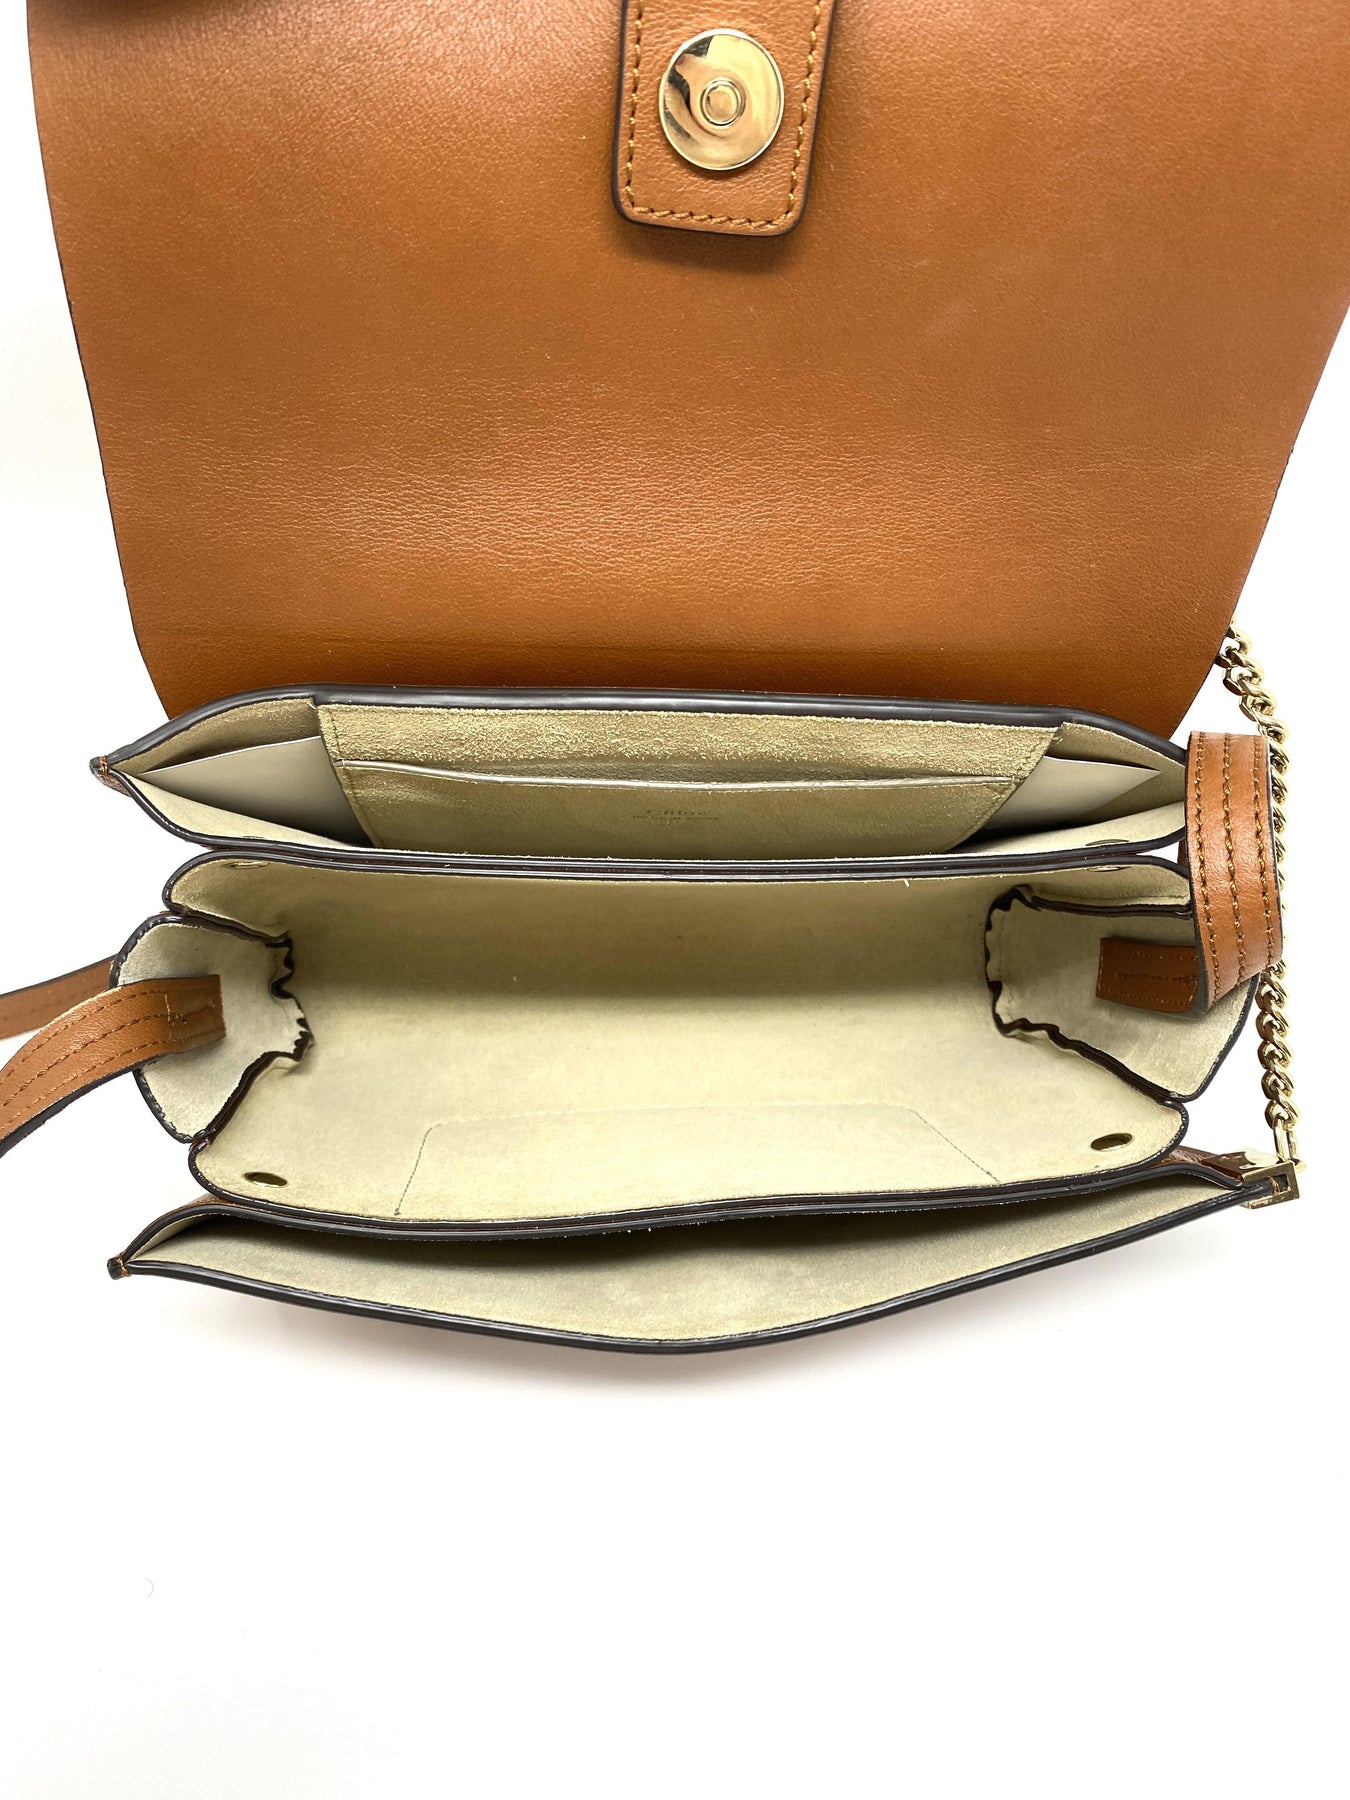 Chloe Faye Small Suede Leather Shoulder Bag Brown